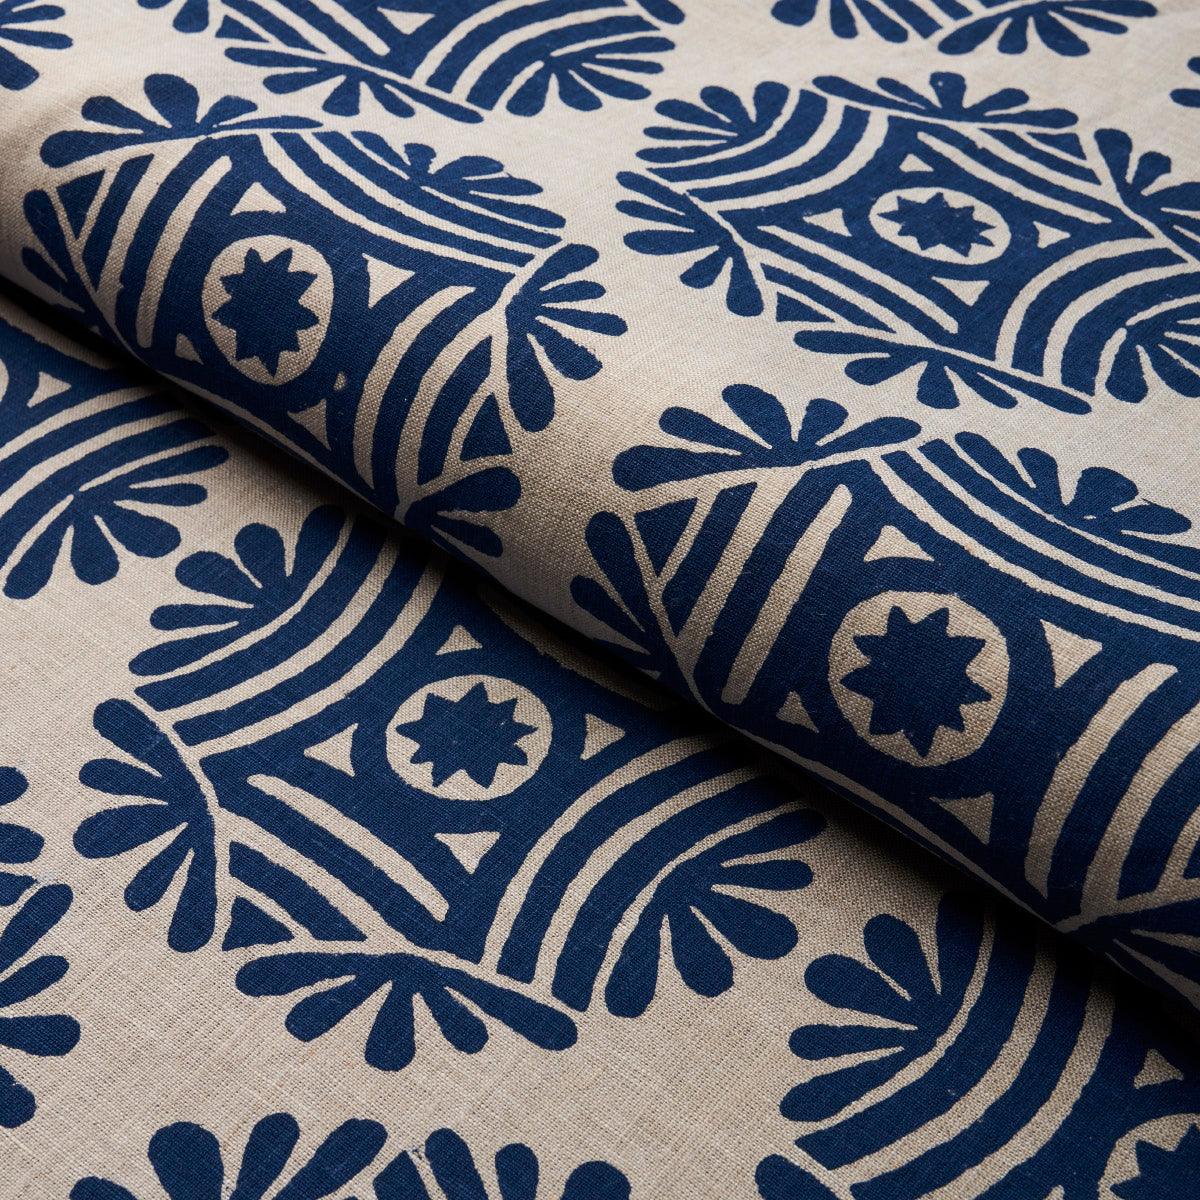 Purchase 181541 | Gilded Star Block Print, Navy On Natural - Schumacher Fabric